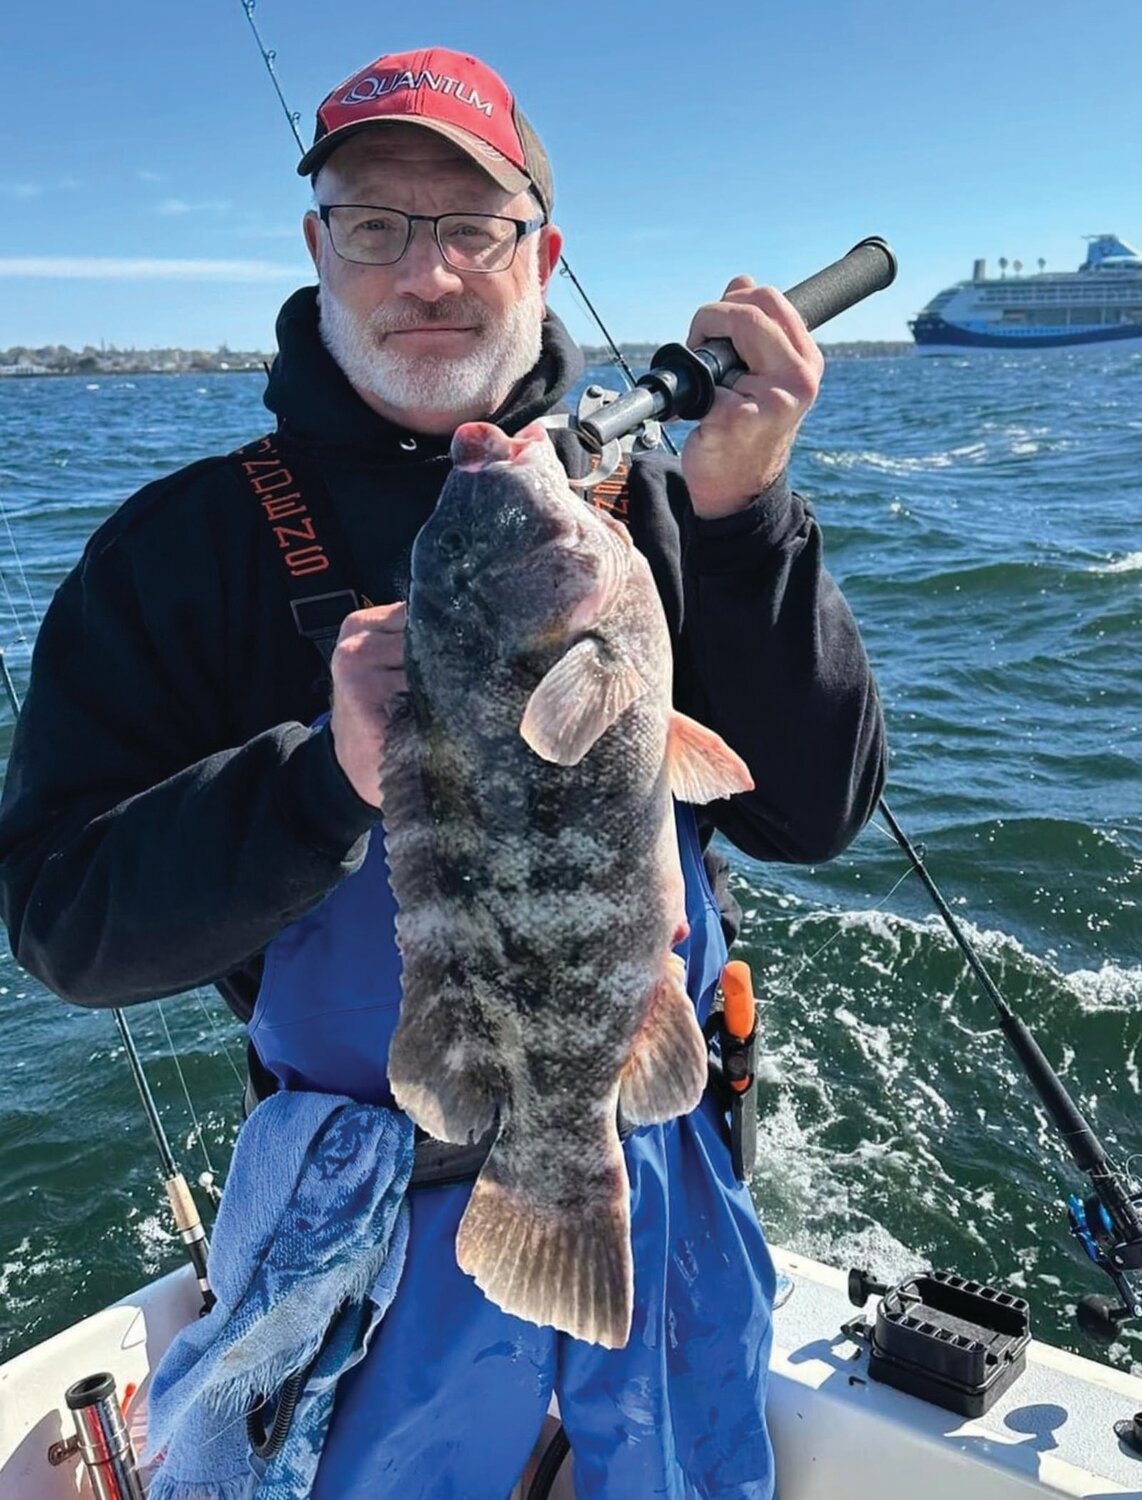 BIG TAUTOG: Greg Vespe of Tiverton said, “Still some tautog in the Bay but fish starting to move out front” off Narragansett, Jamestown, Newport and the Sakonnet River. (Submitted photos)